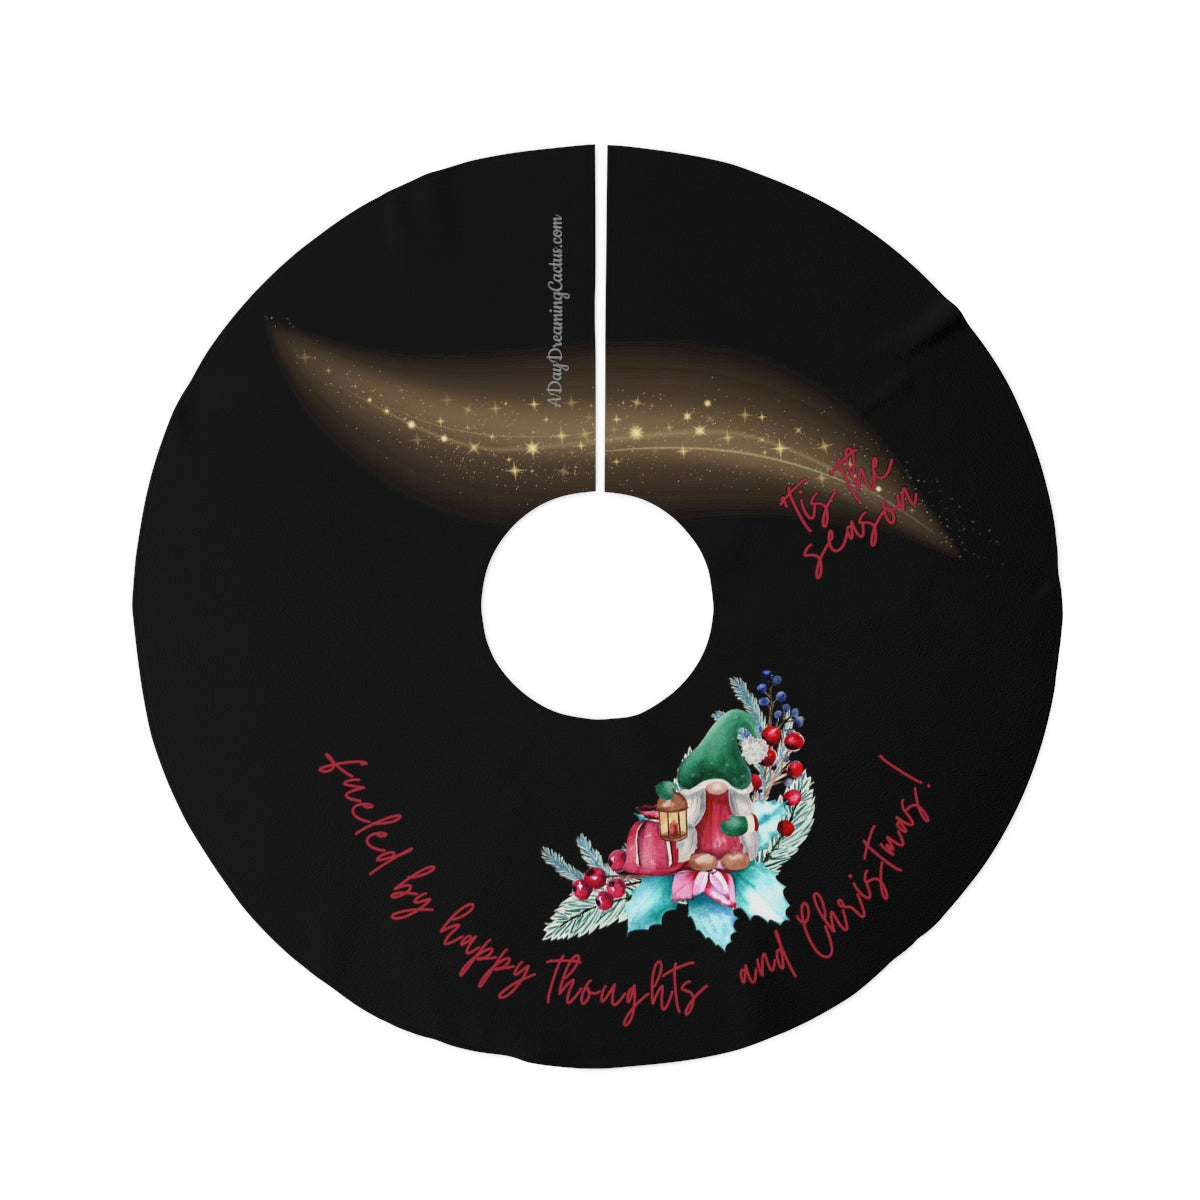 Black Fueled by Happy Thoughts & Christmas with Christmas Gnome & Starry Night ~ Christmas Holiday Round Tree Skirt